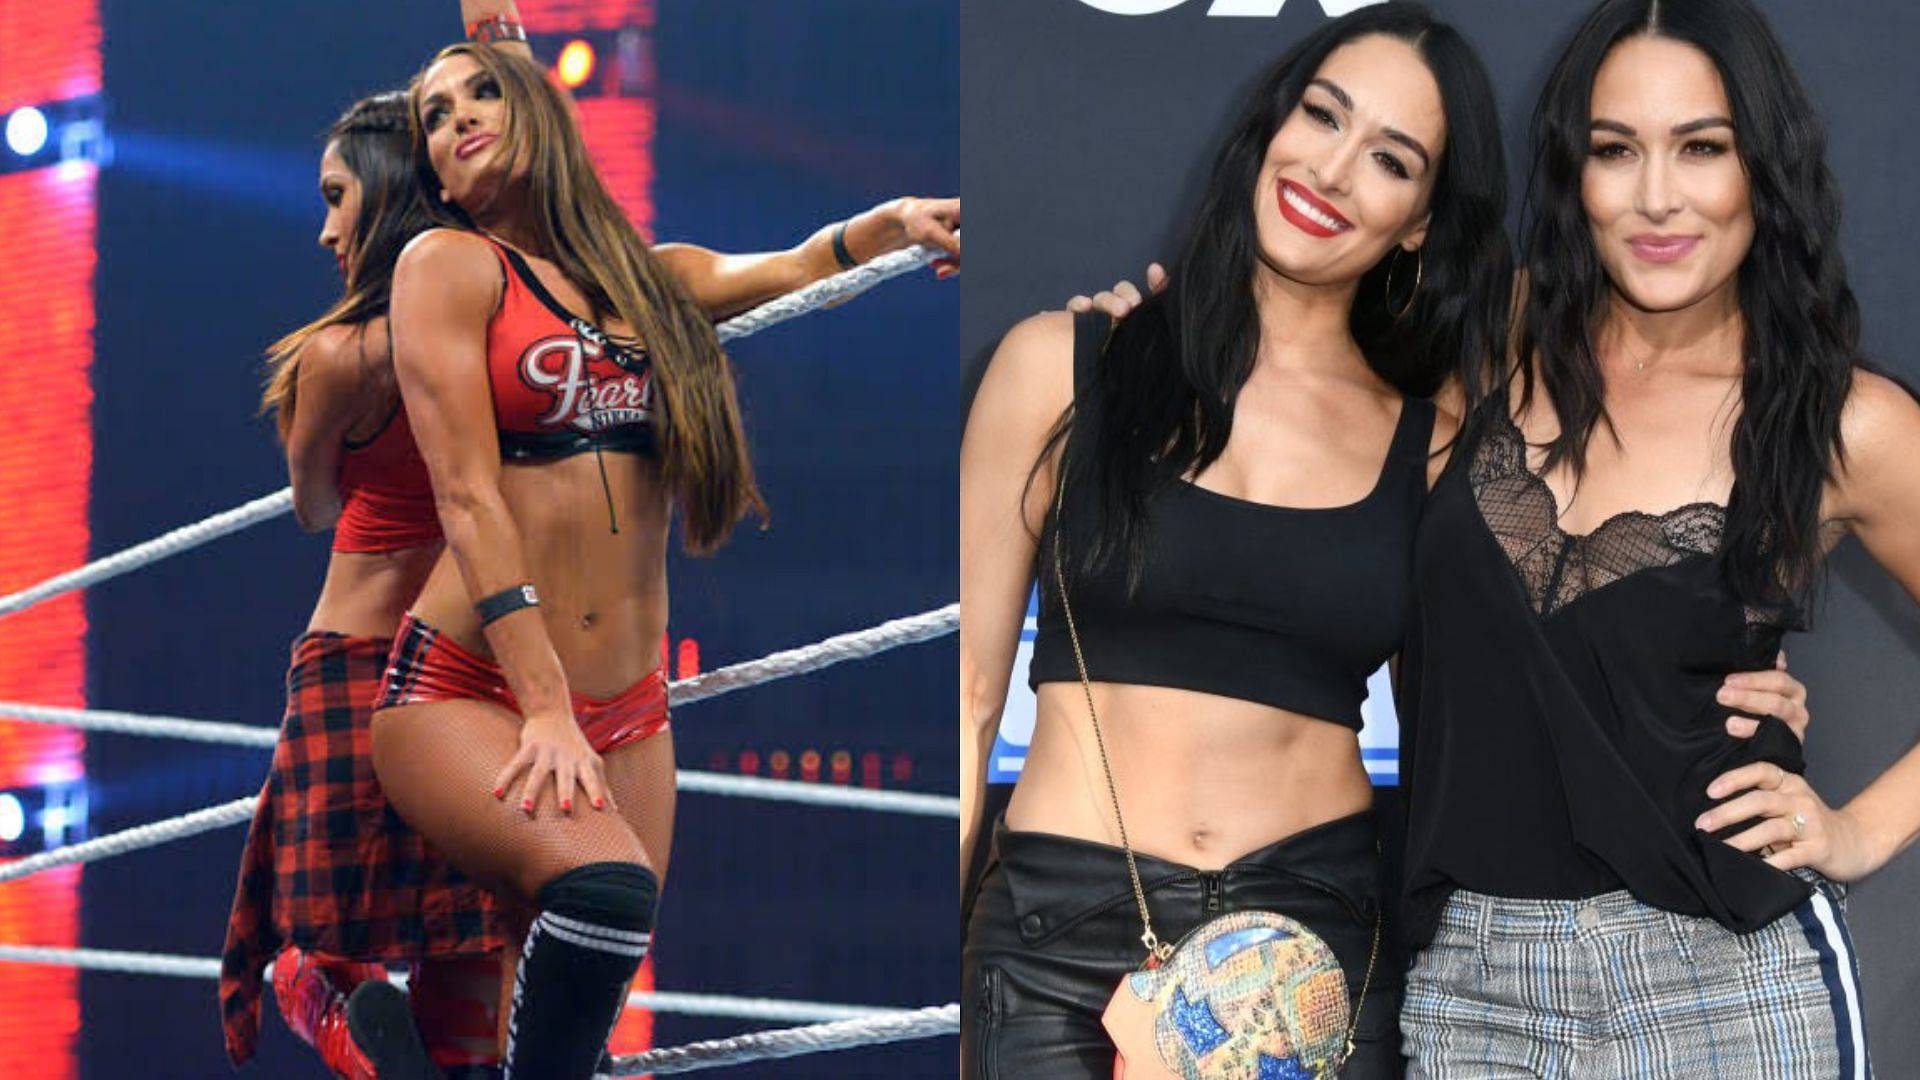 Could Brie and Nikki Bella return to WWE in the near future?